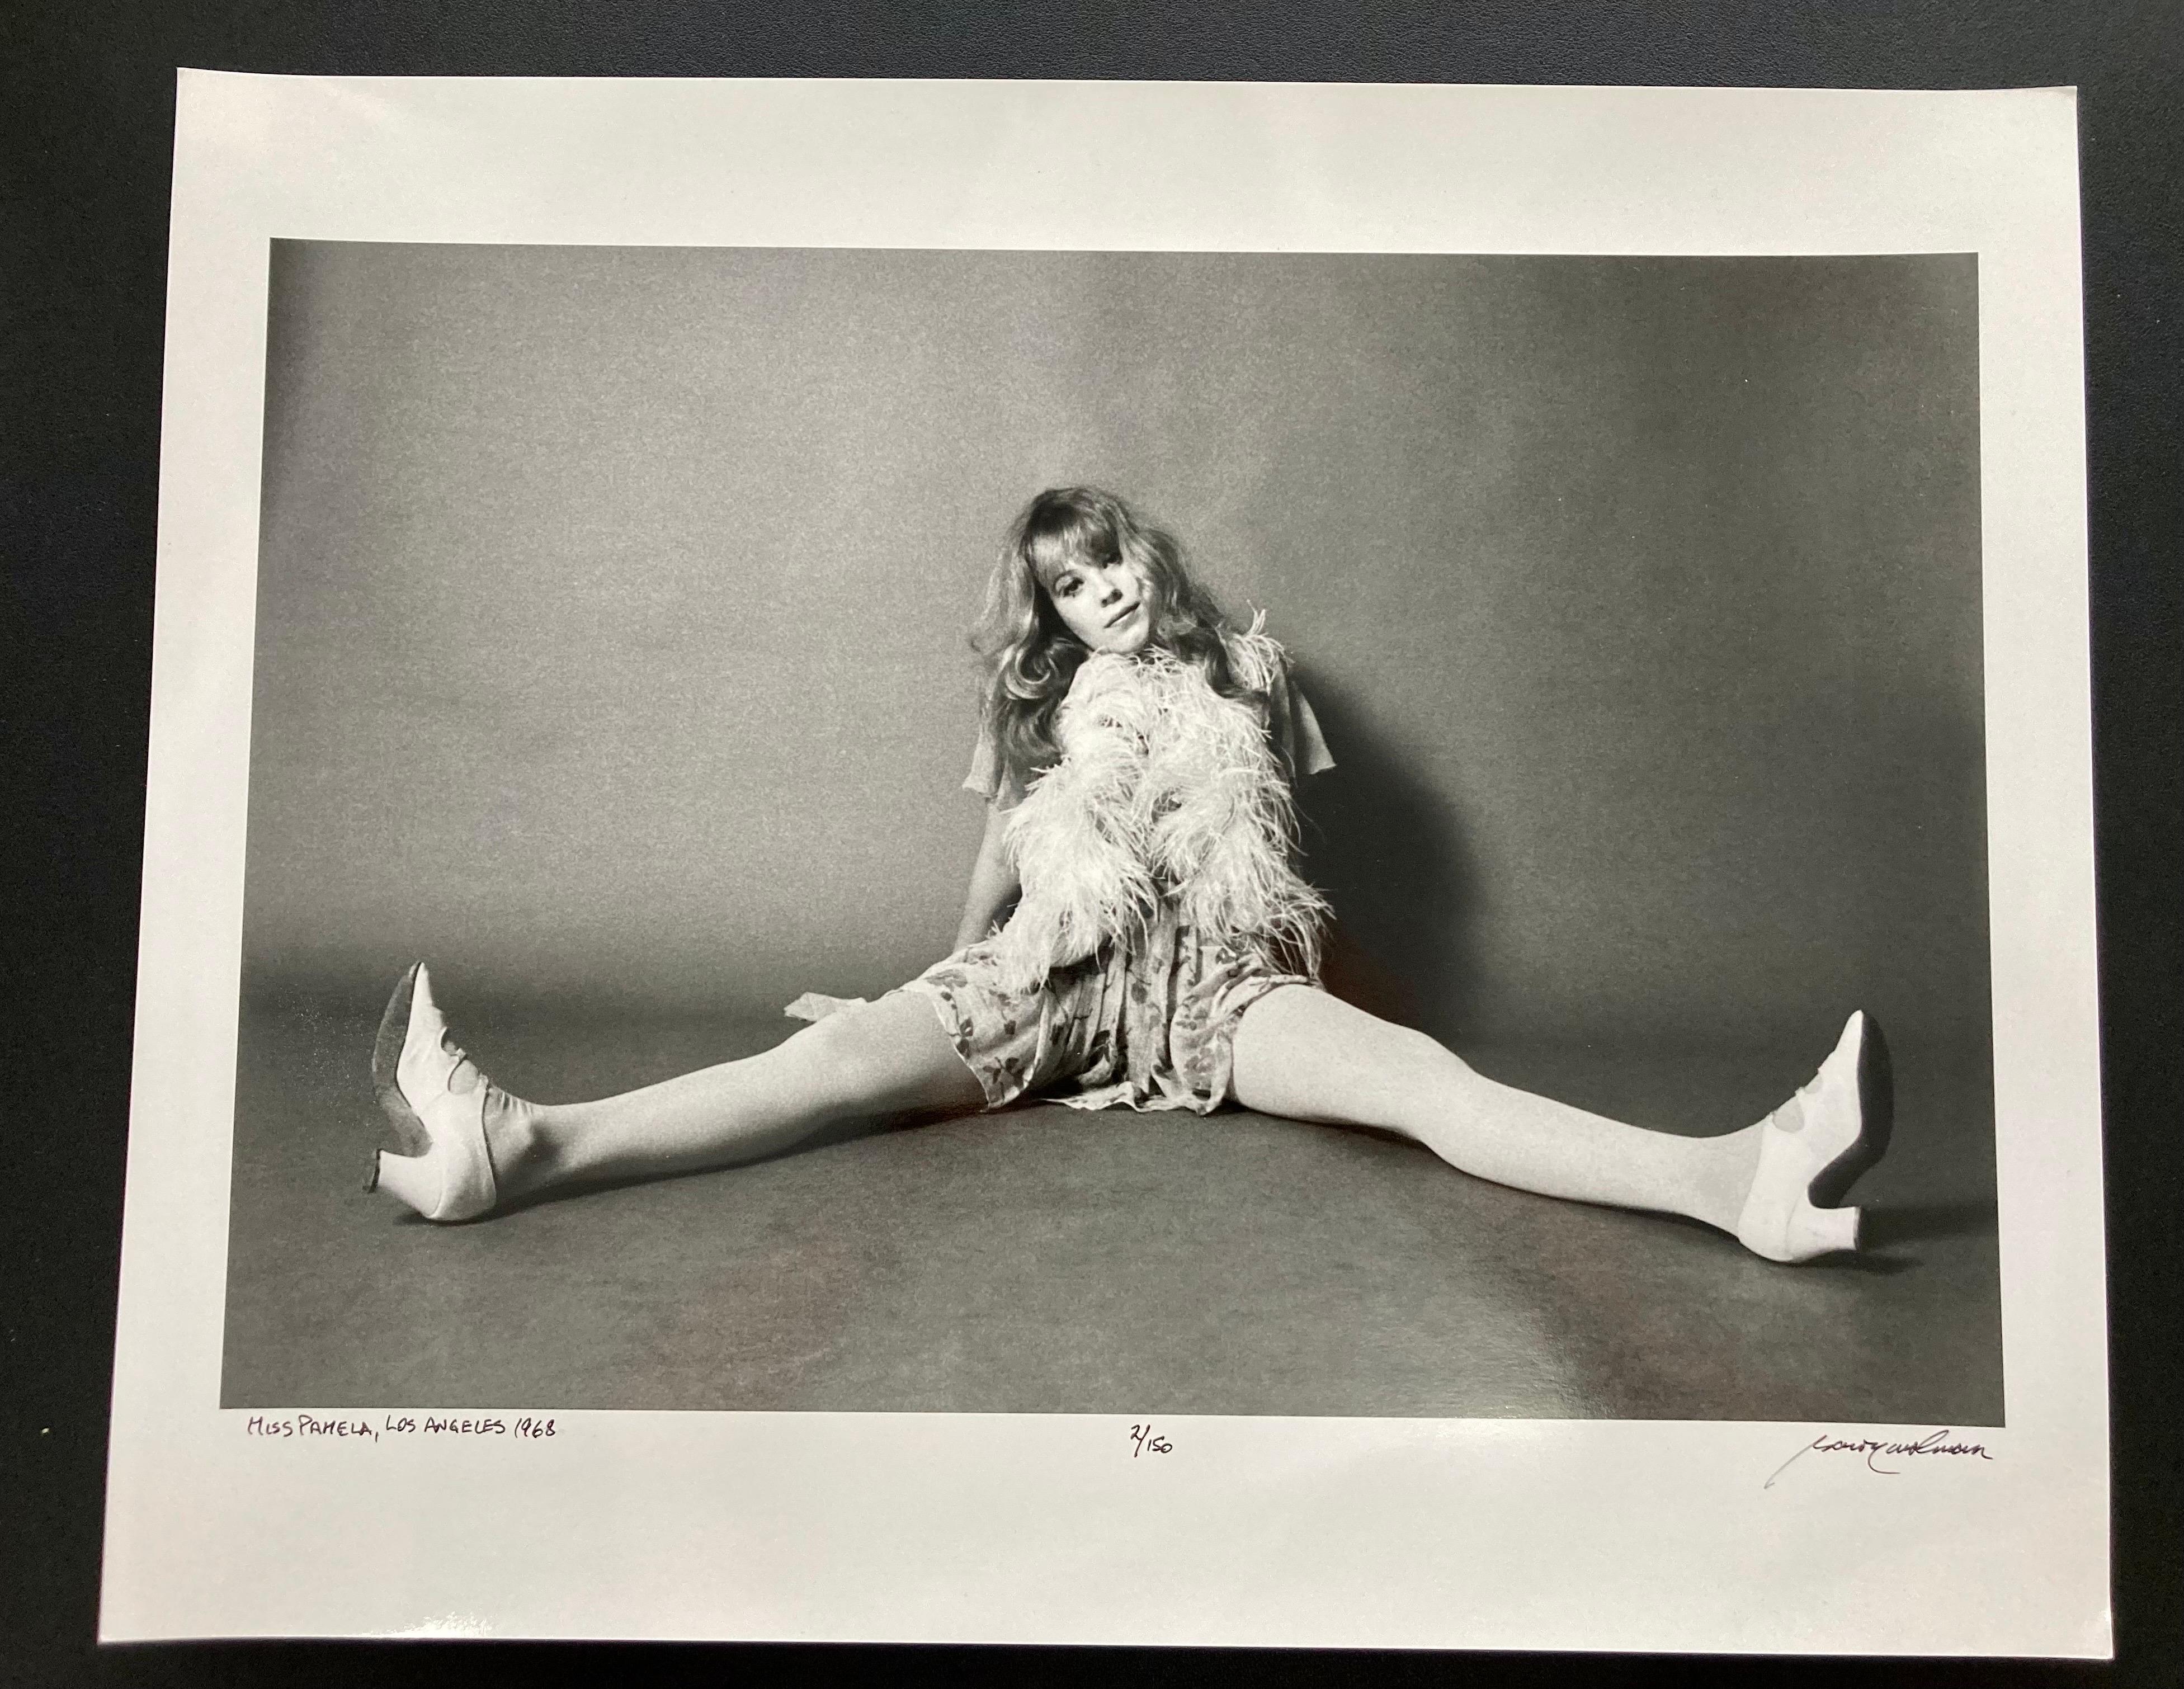 Pamela Des Barres 1968 Groupies, signed limited edition silver gelatin print - Photograph by Baron Wolman